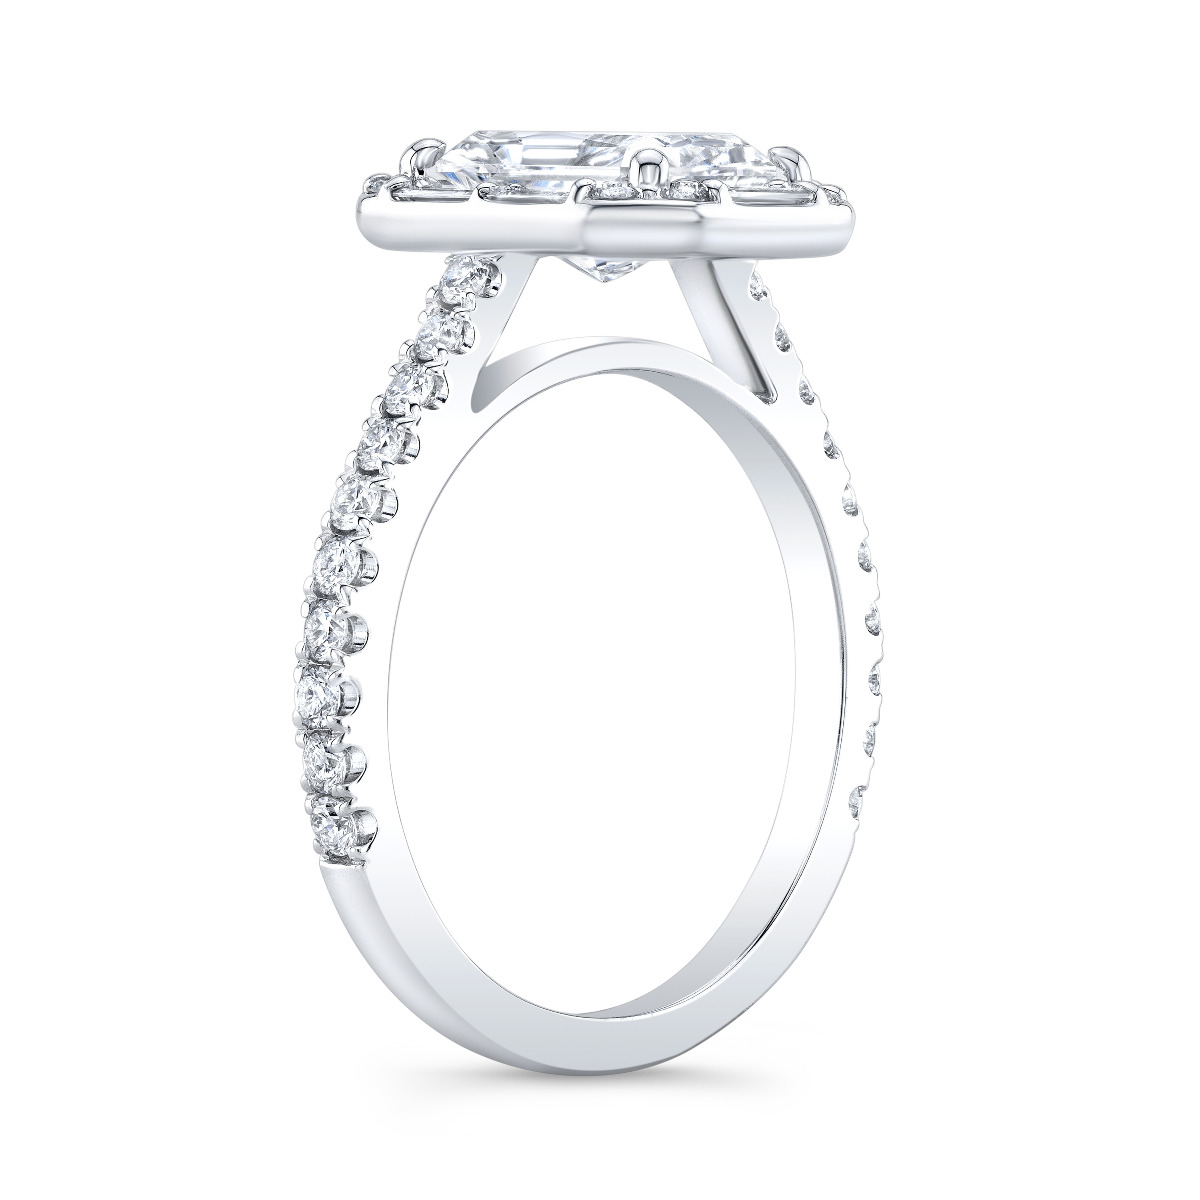 This engagement ring features stunning Baguette and Pave Diamonds on the halo setting, viewed from a side profile.